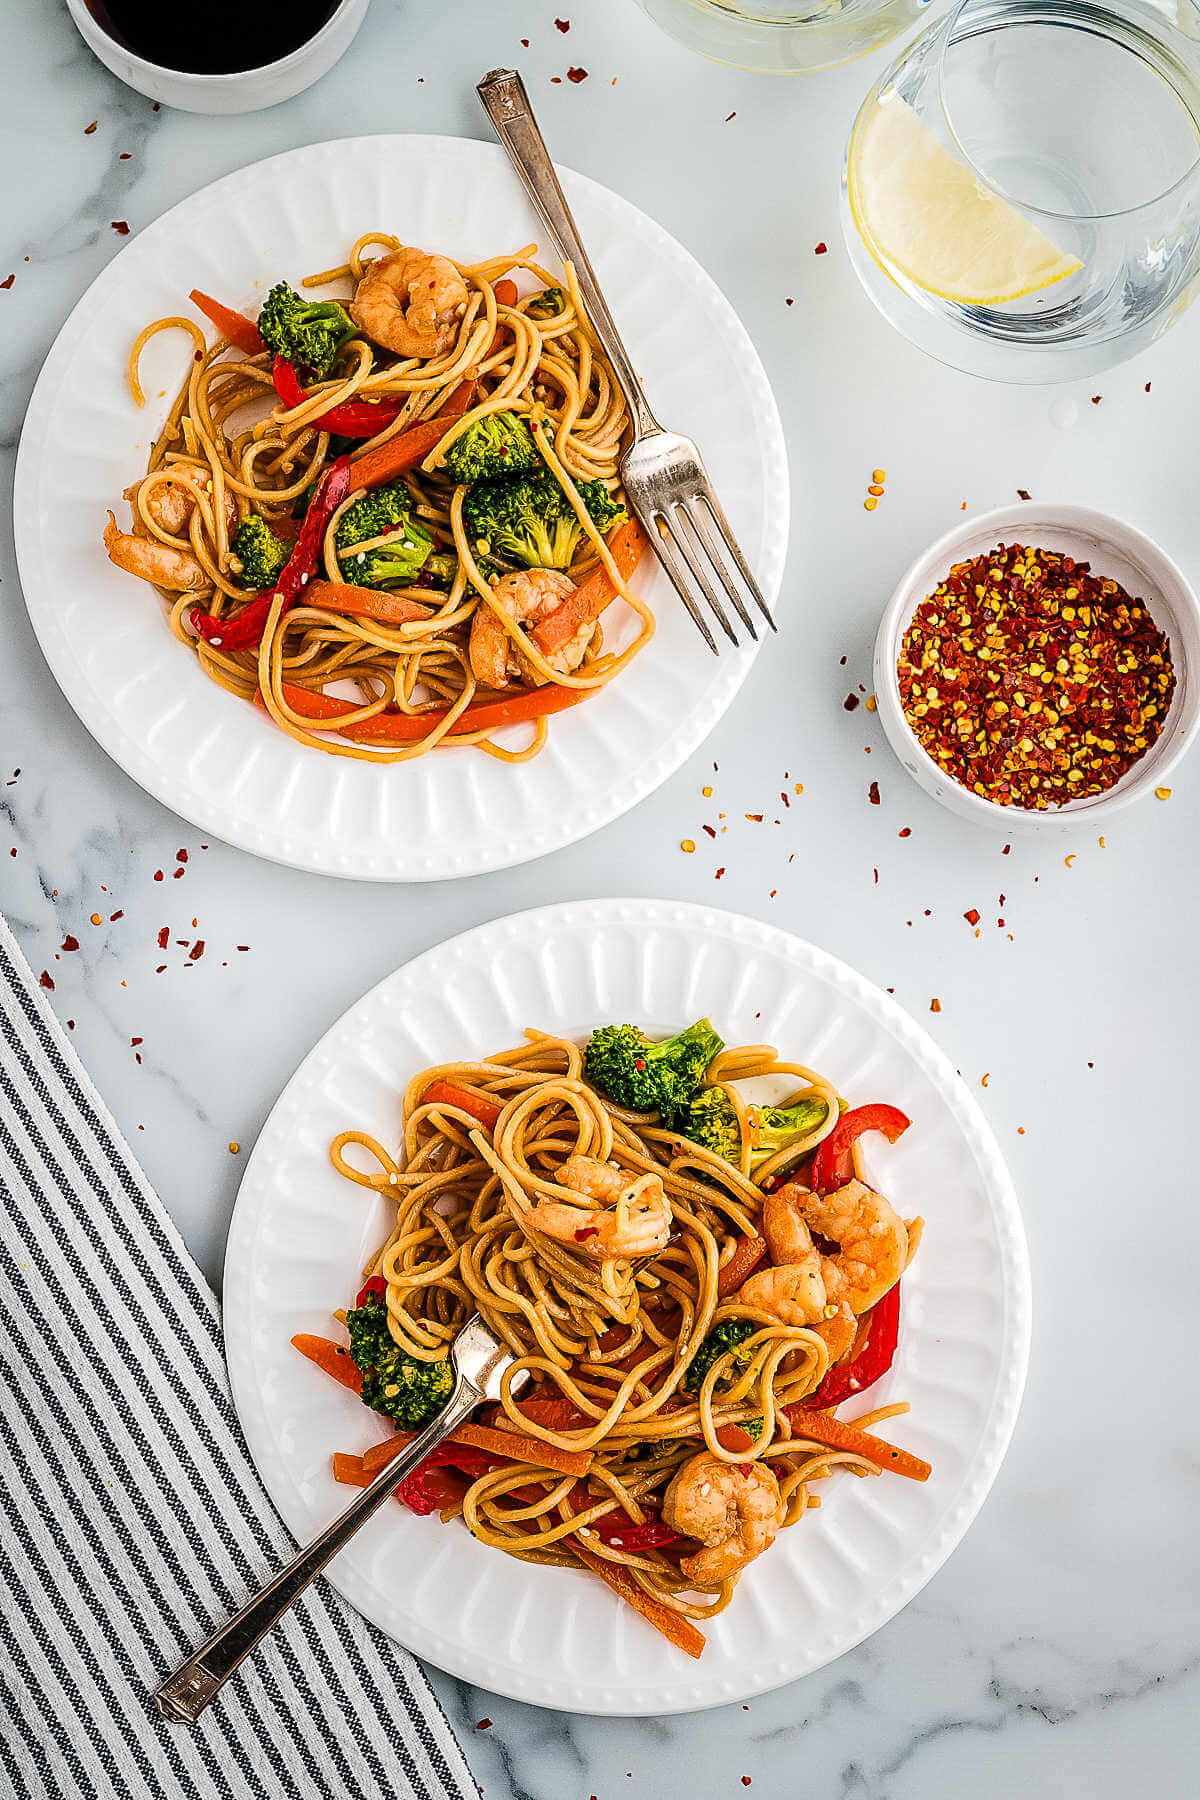 Two servings of shrimp lo mein on plates on a table with a bowl of red pepper flakes.